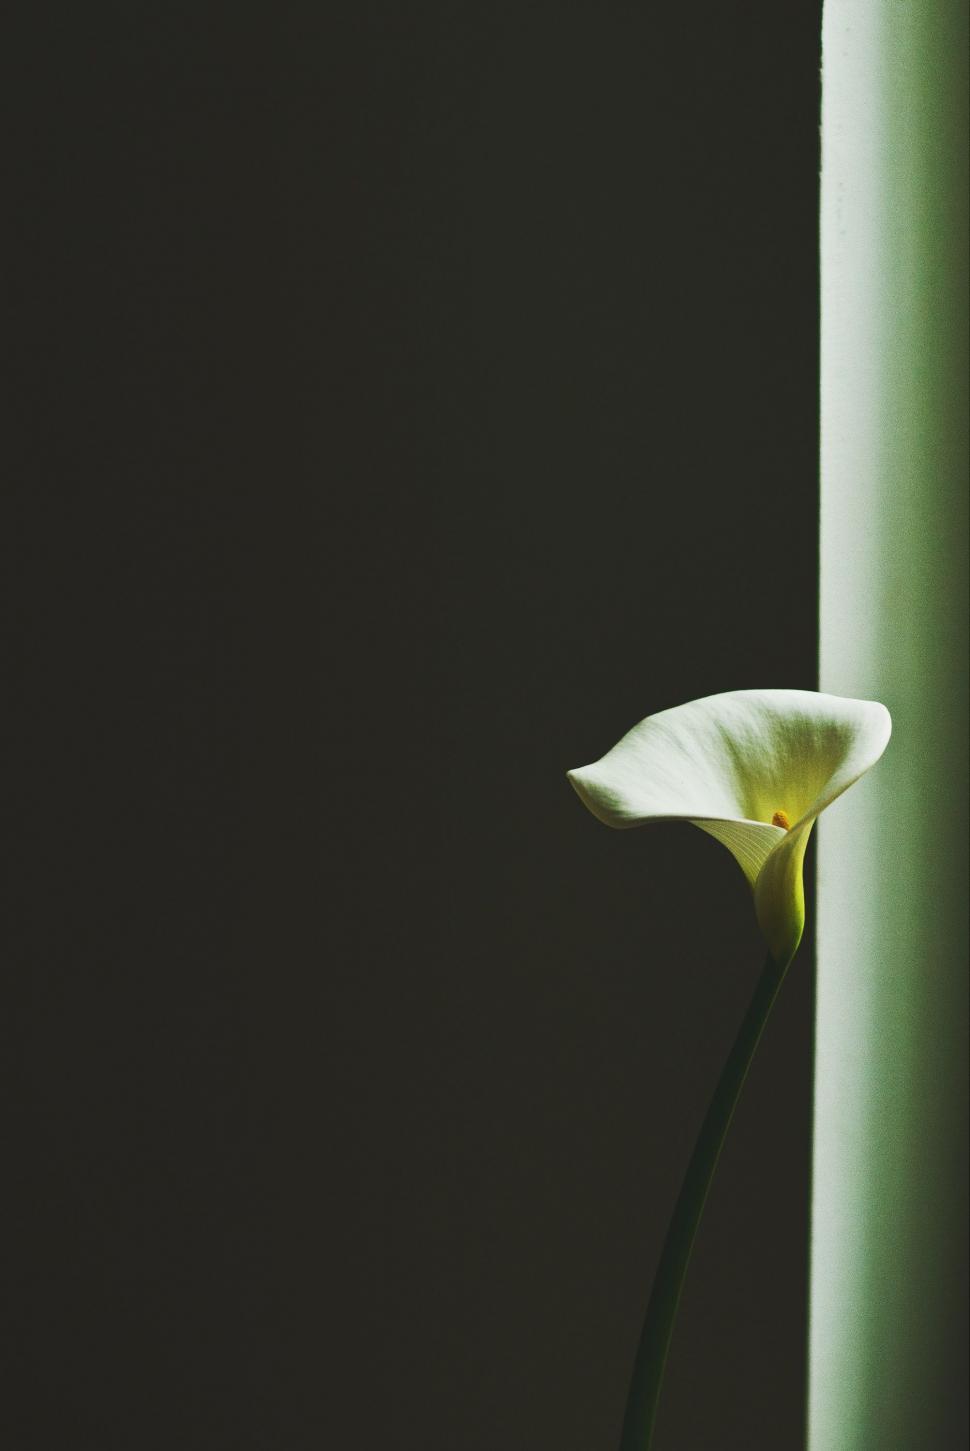 Free Image of Single White Flower Blooming in Dimly Lit Room 